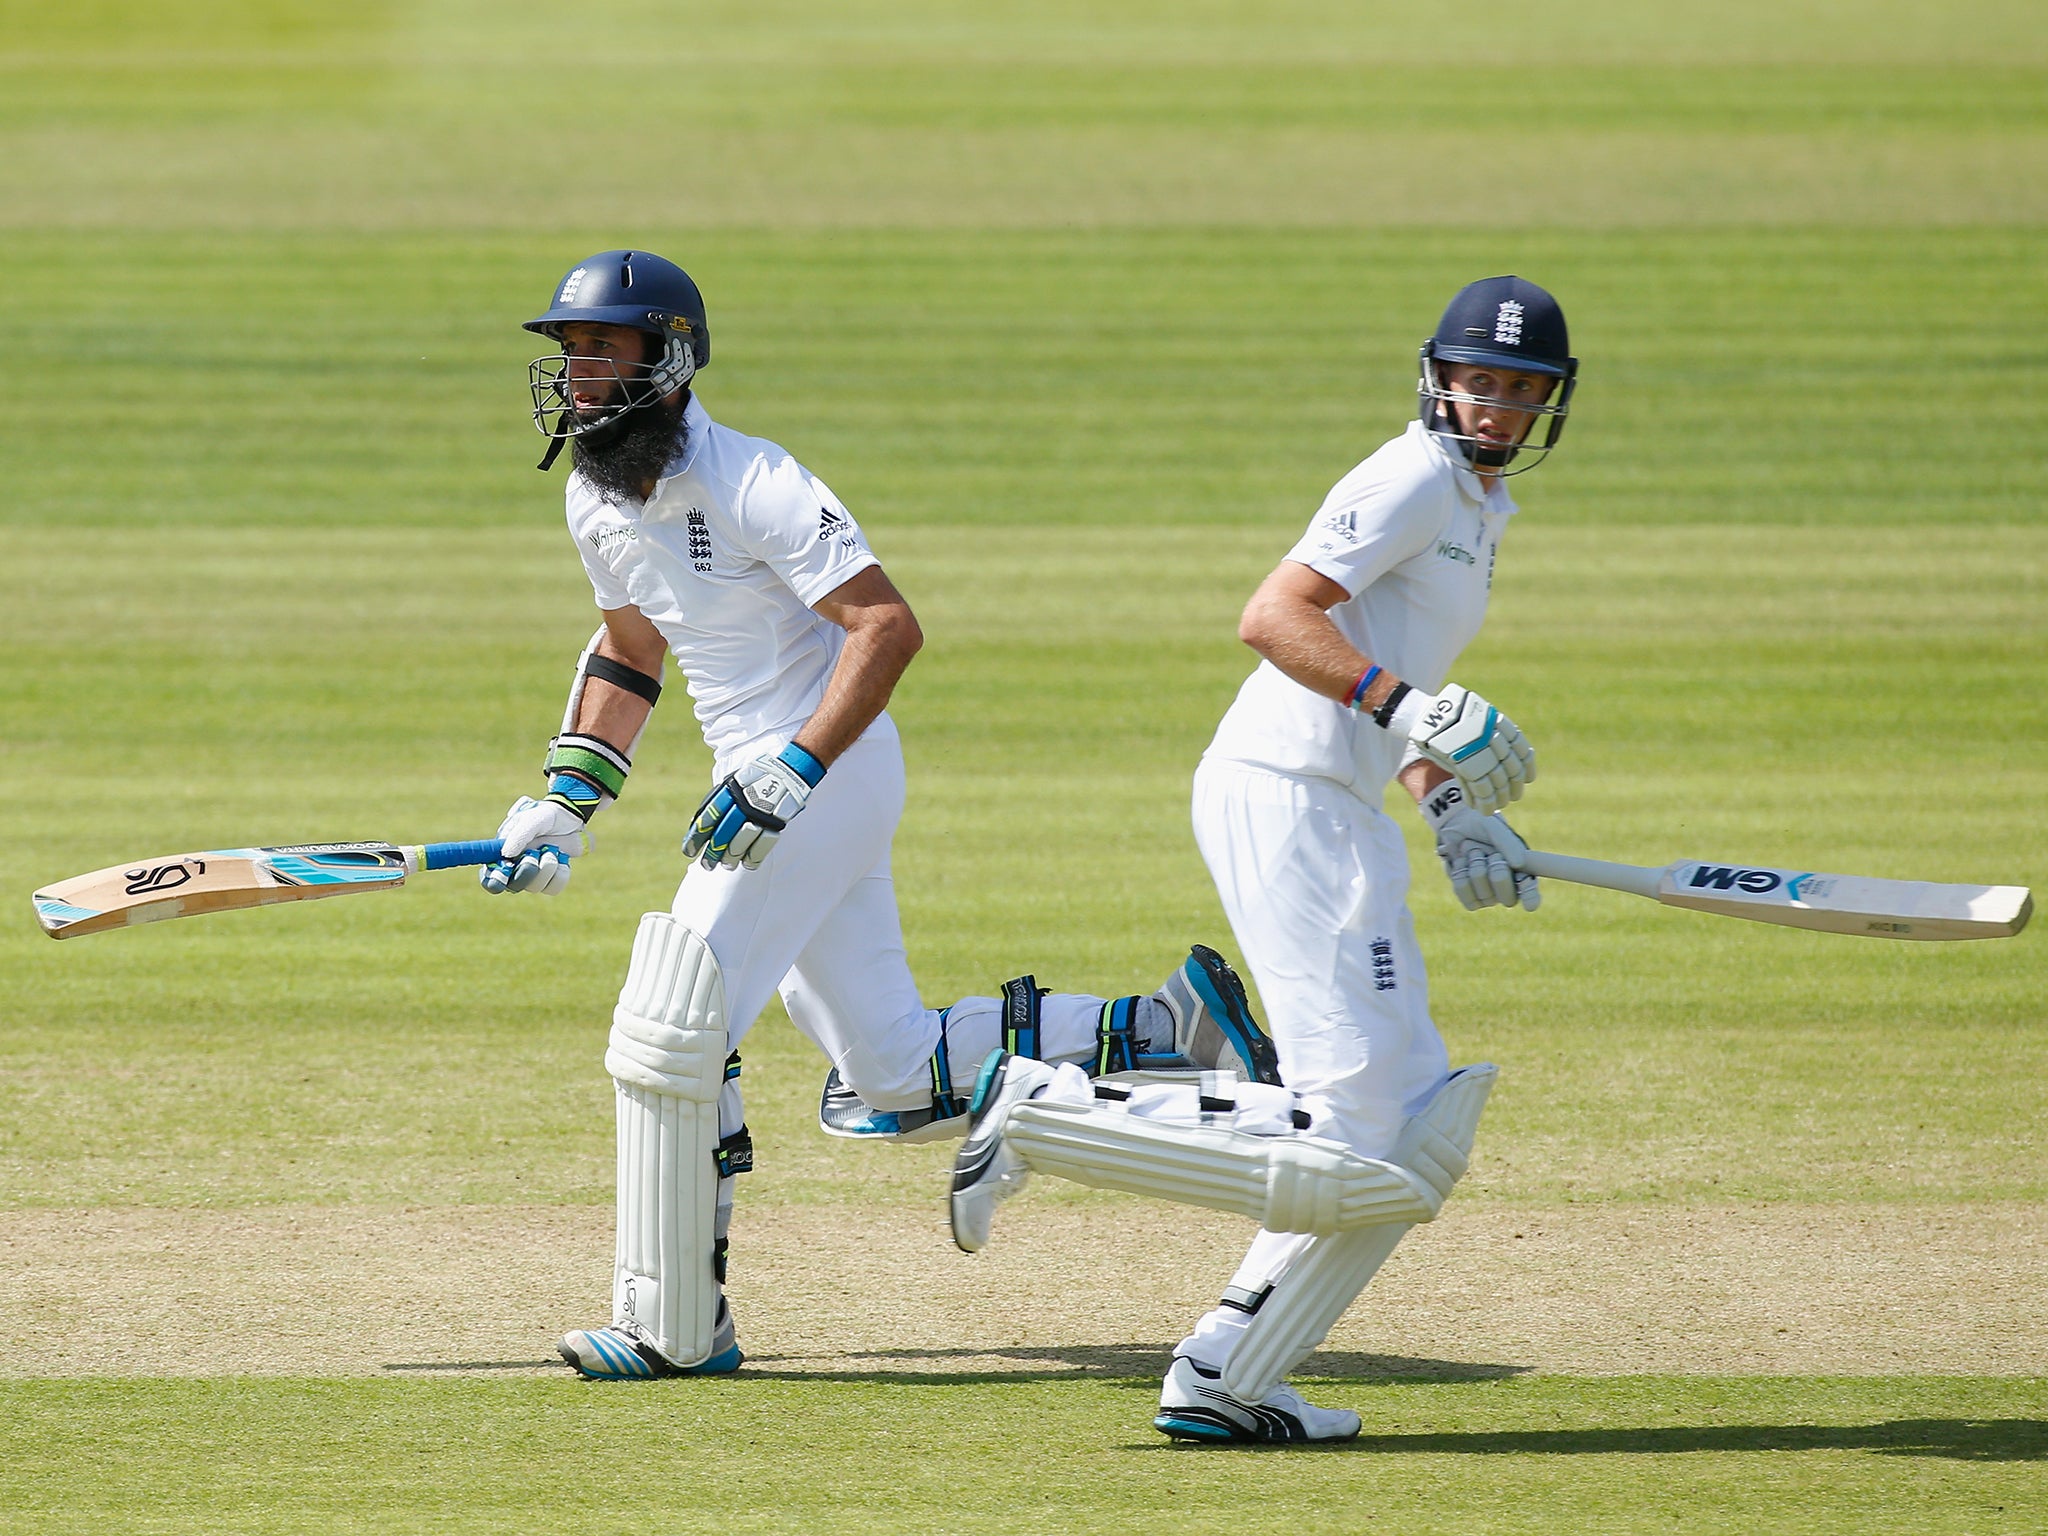 Moeen Ali (L) and Joe Root of England run between the wickets during day one of the 1st Investec Test match between England and Sri Lanka at Lord's